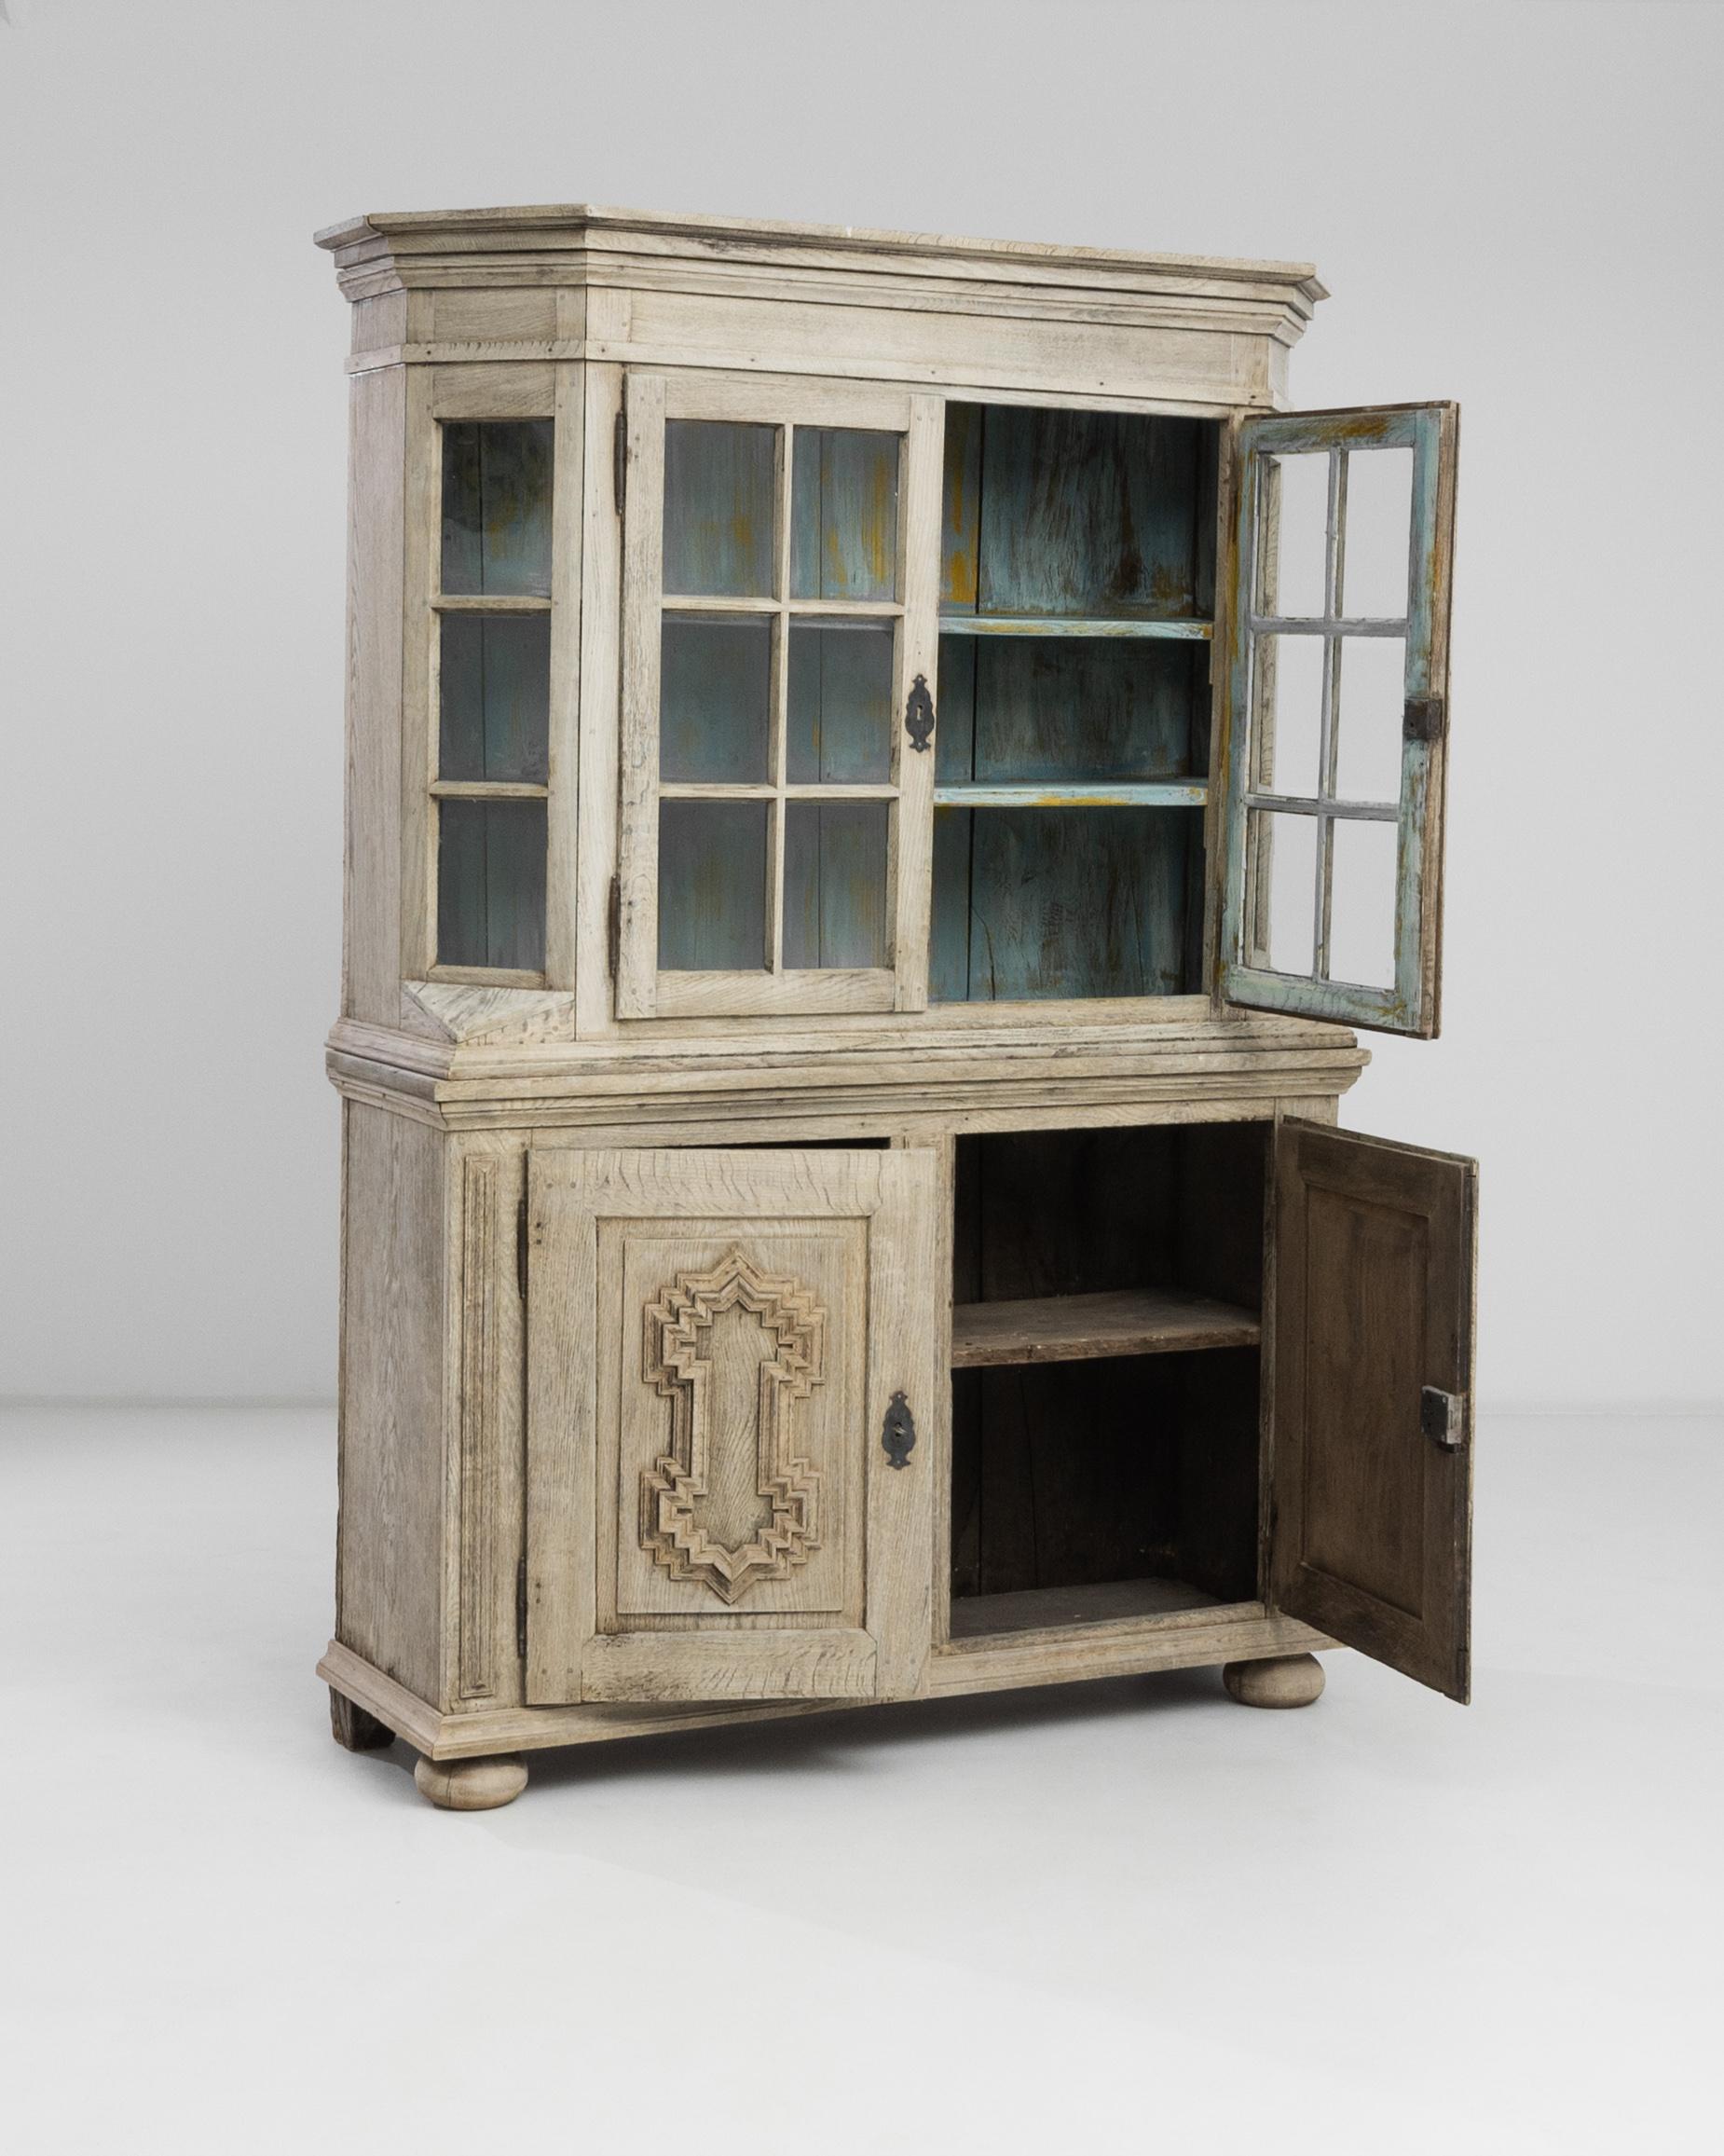 The 1800s German Bleached Oak Vitrine presents an exquisite blend of rustic charm and timeless elegance. Crafted during a period where attention to detail was paramount, this vitrine showcases a weathered patina that whispers stories of its past